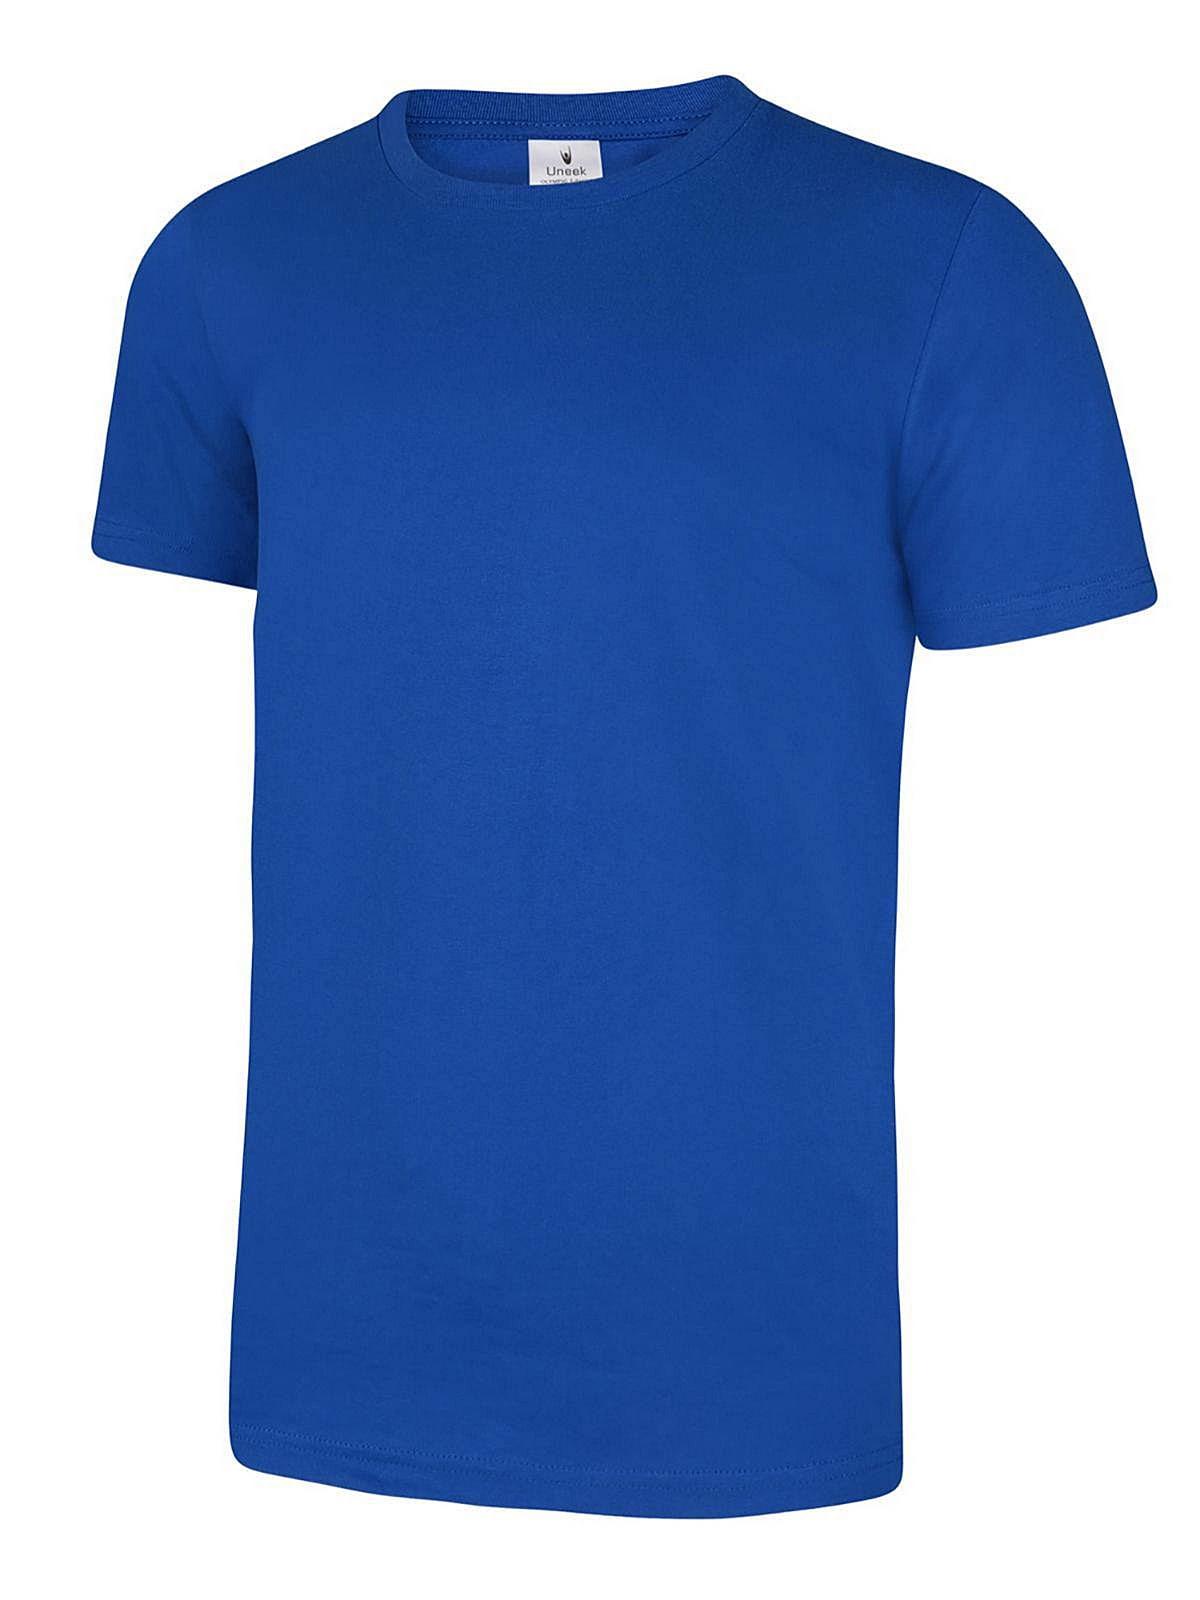 Uneek 150GSM Olympic T-Shirt in Royal Blue (Product Code: UC320)